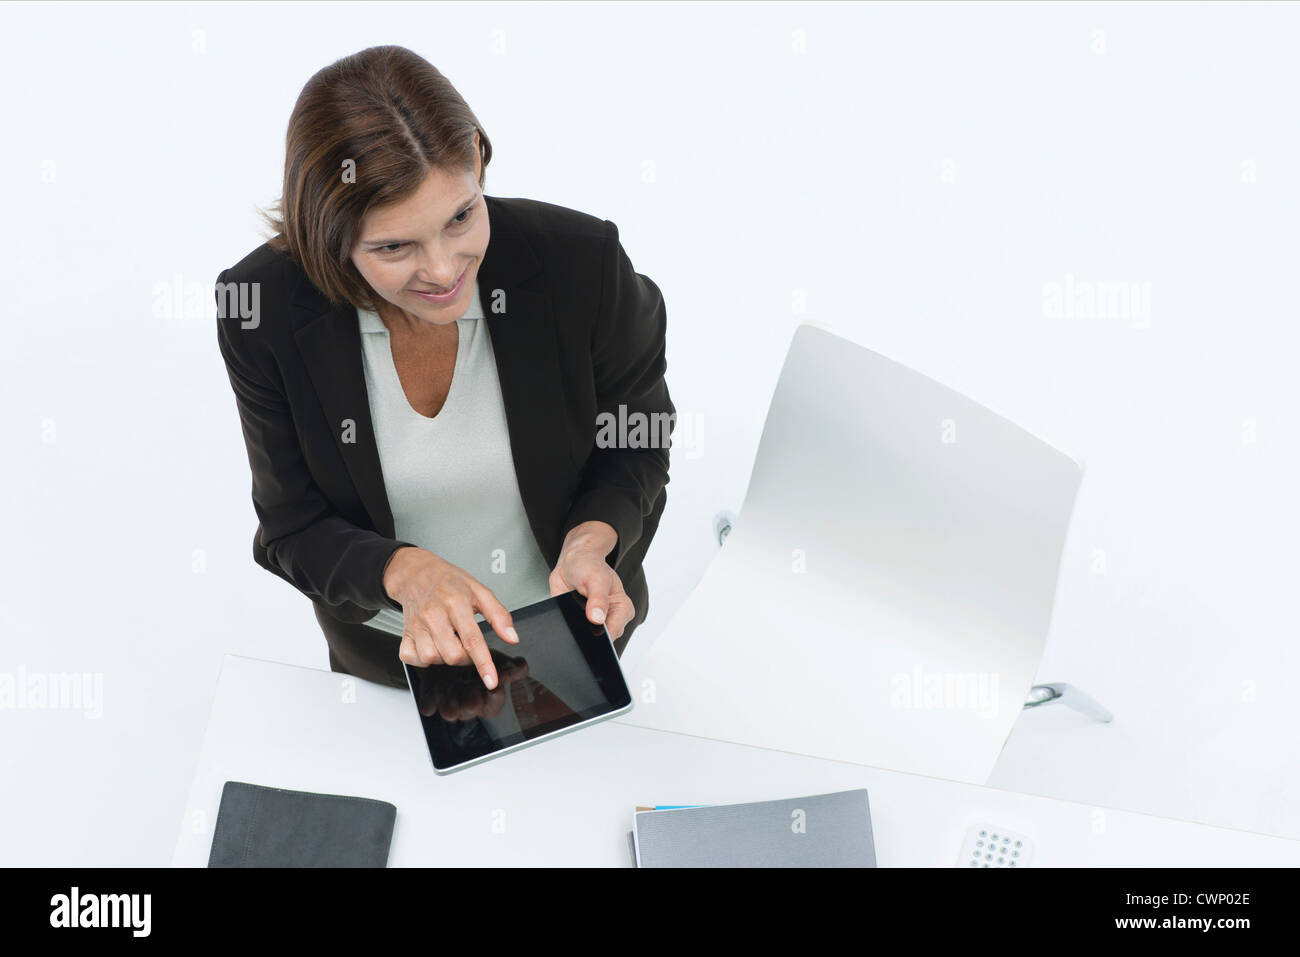 Businesswoman using digital tablet, high angle view Banque D'Images